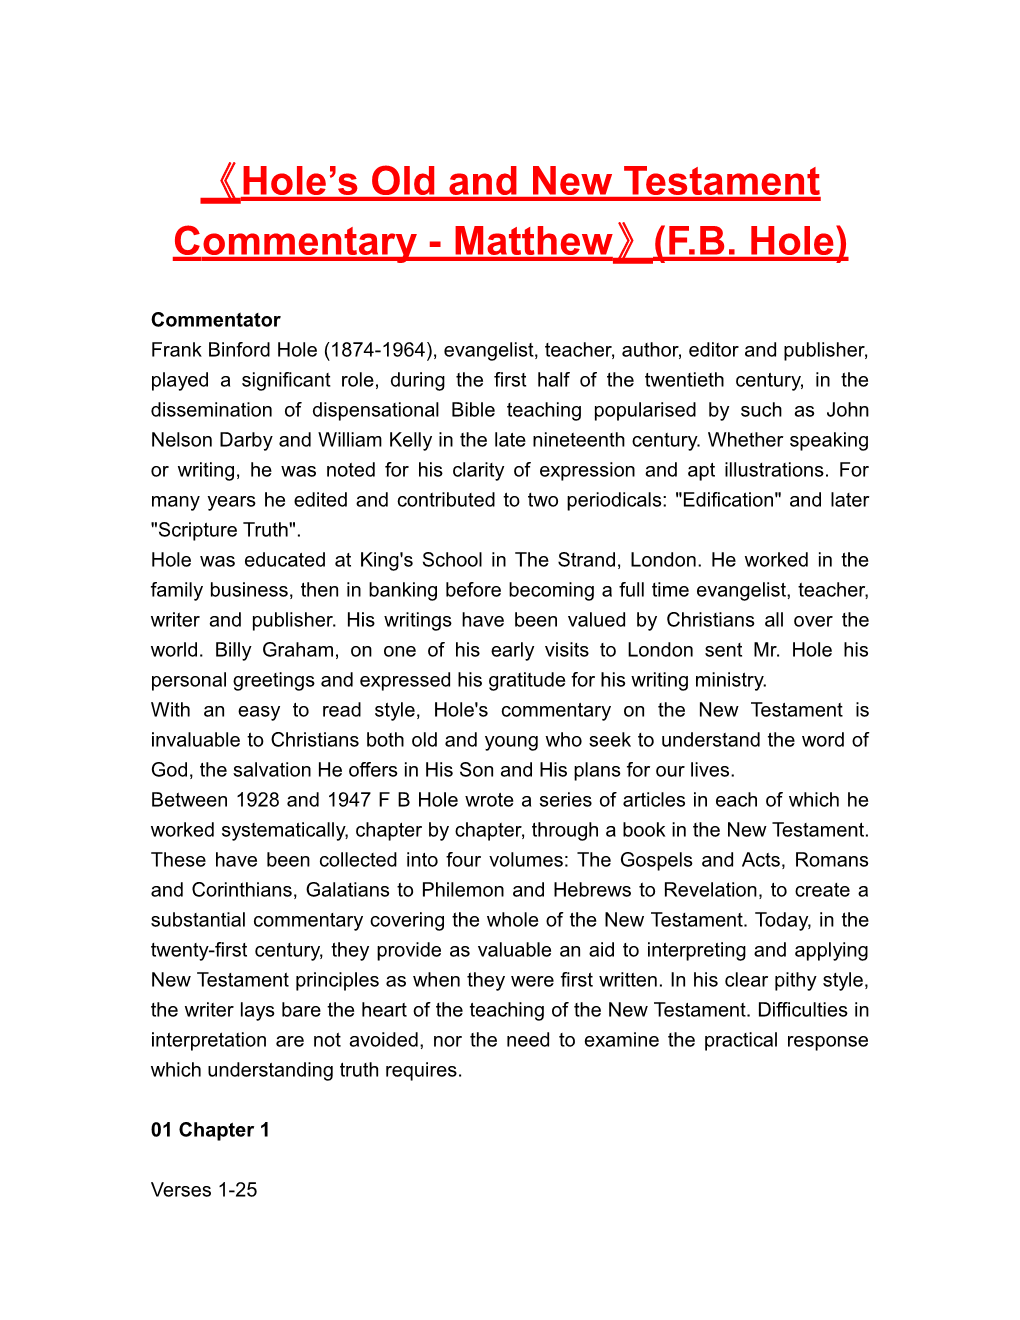 Hole S Old and New Testamentcommentary-Matthew (F.B. Hole)